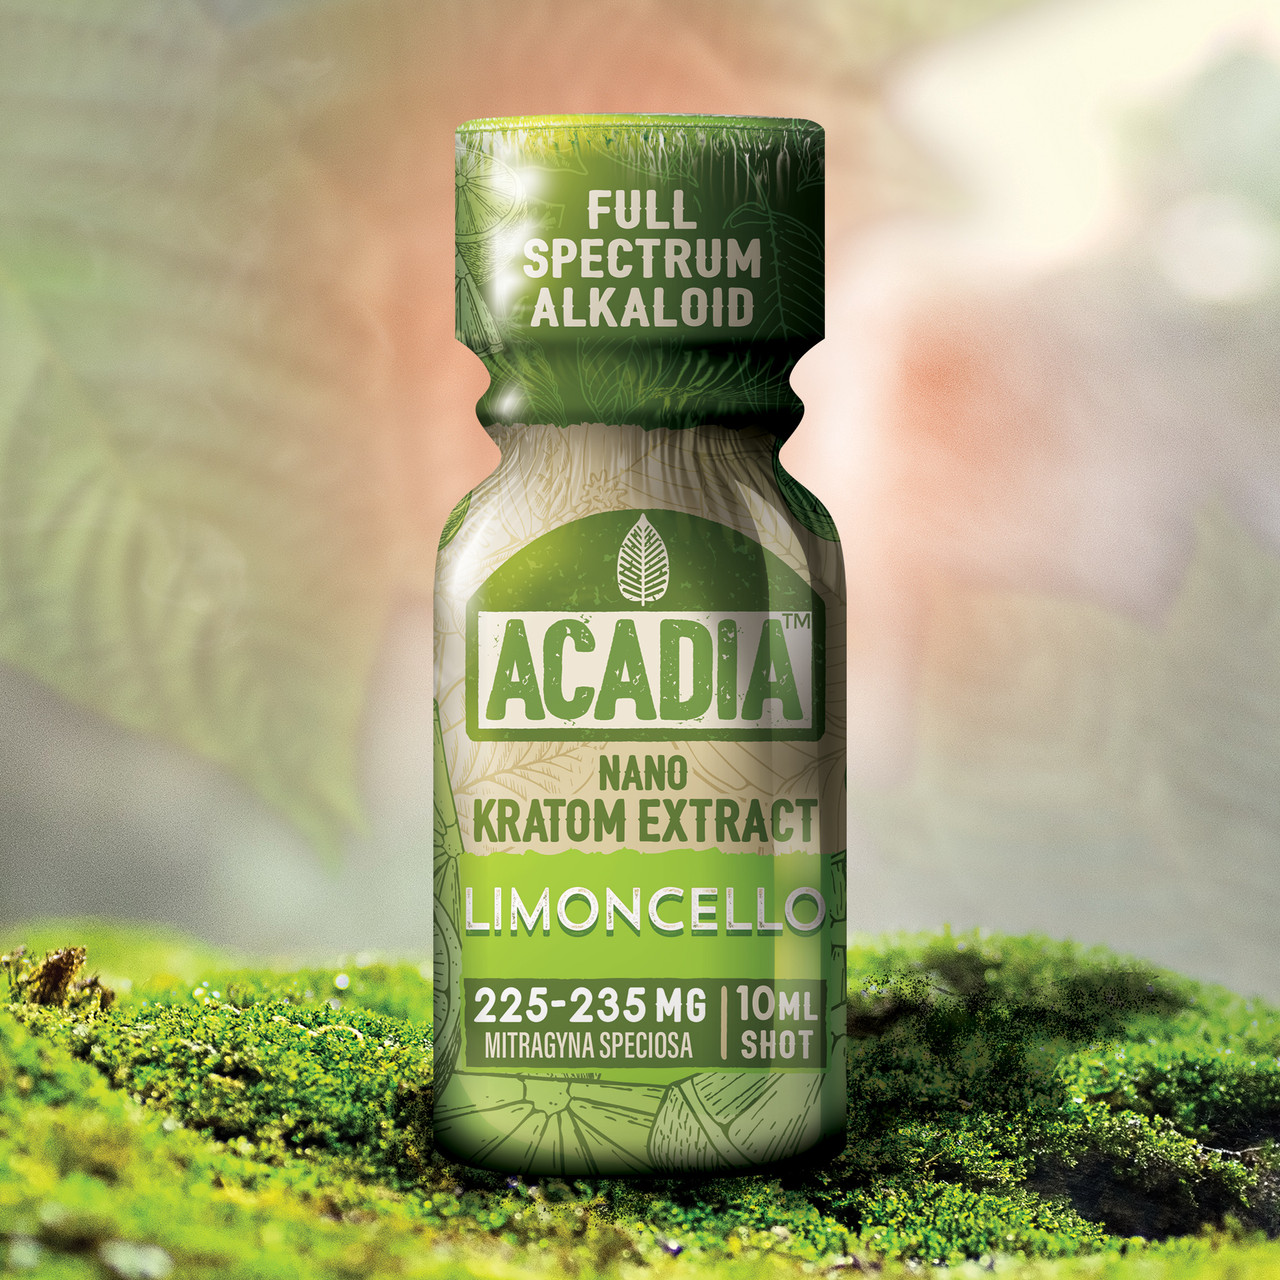 From Leaf to Liquid: The Evolution of Kratom Extract